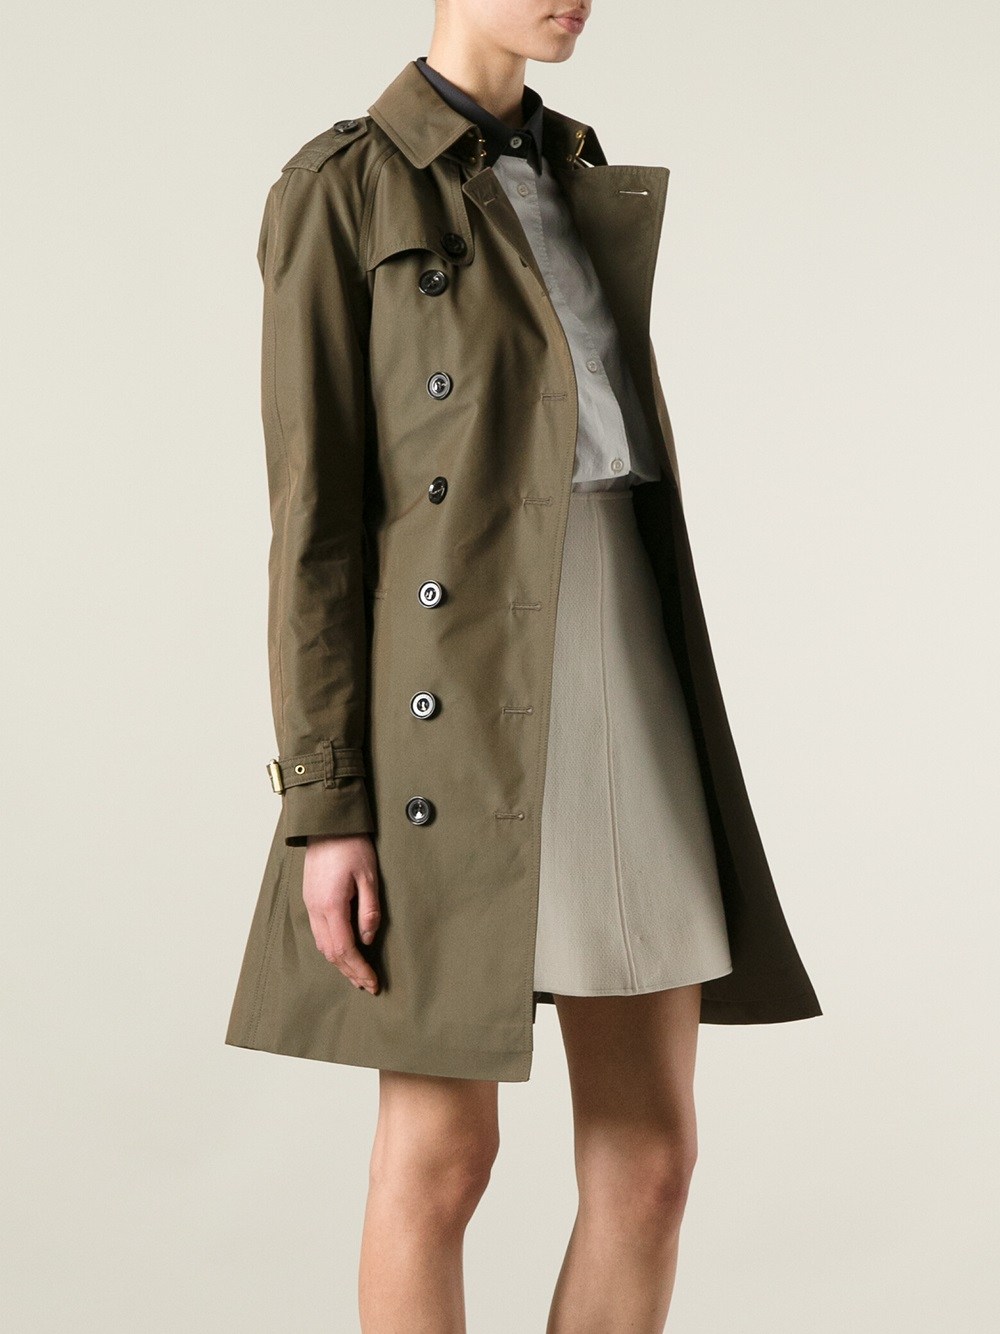 Lyst - Burberry Brit Classic Trench Coat in Green